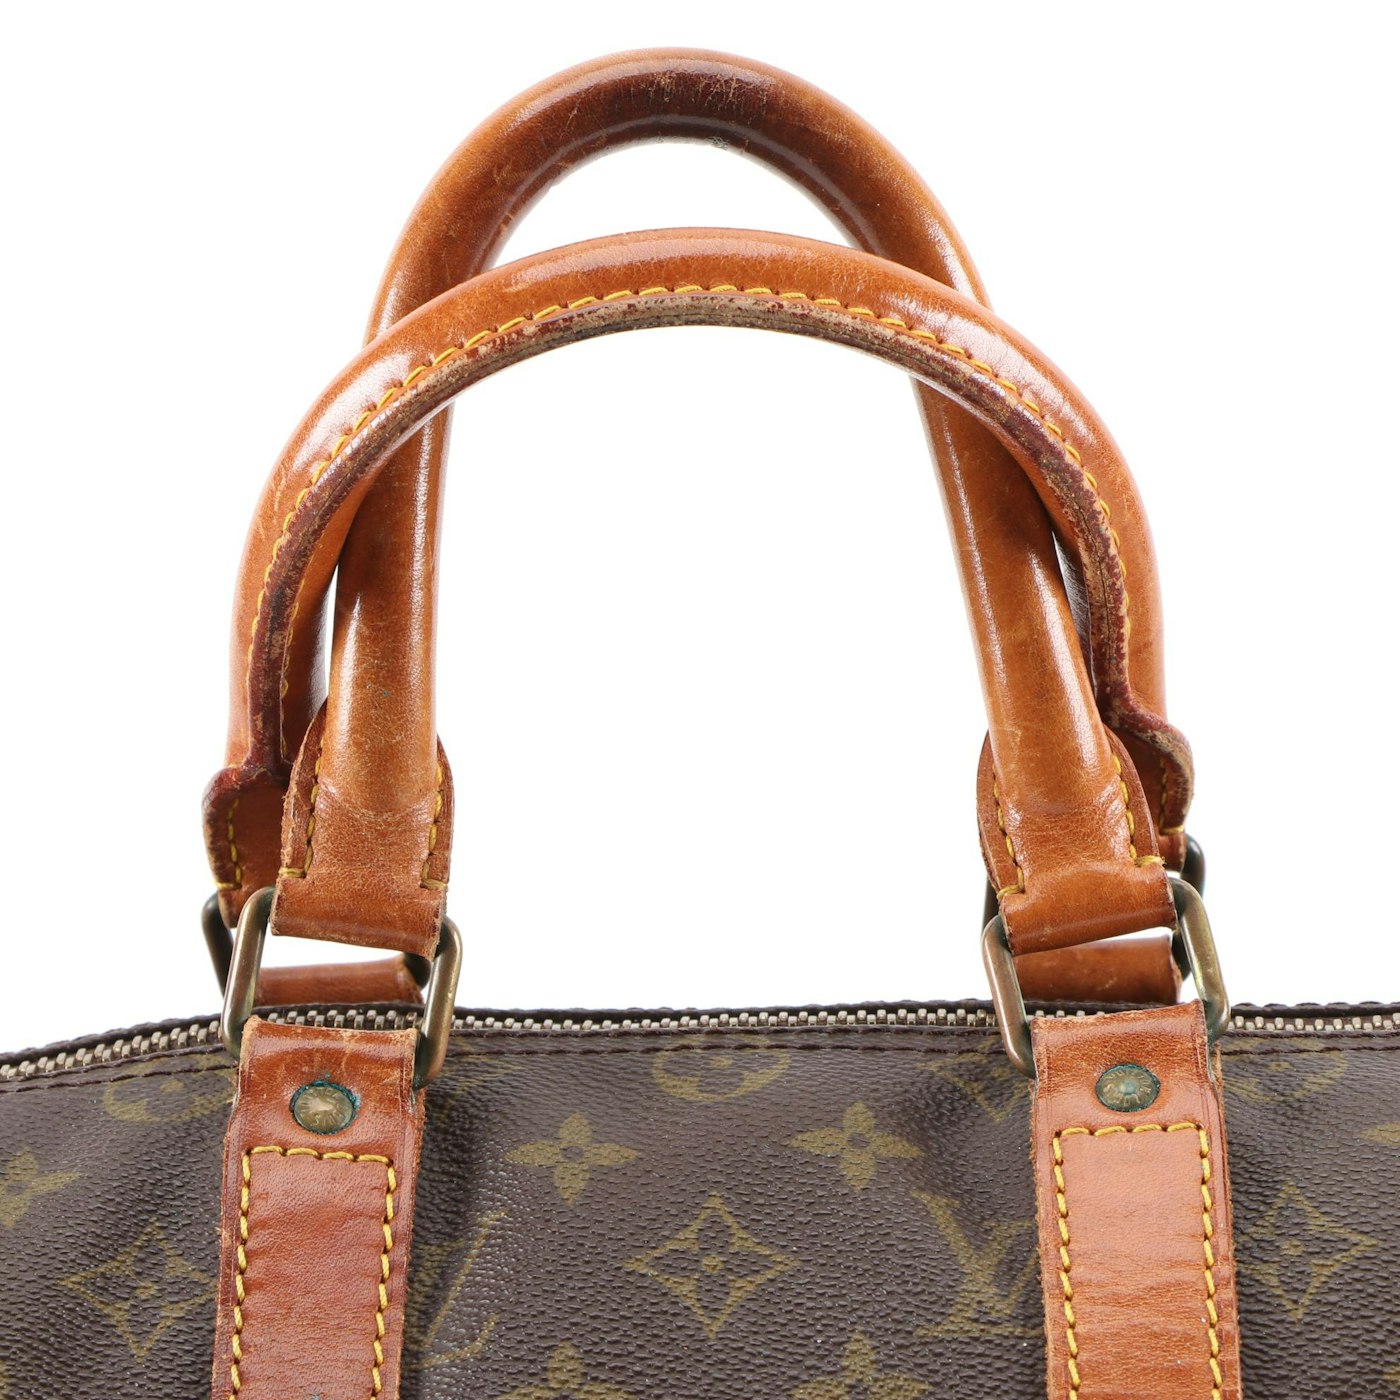 Louis Vuitton Keepall 45 in Monogram Canvas and Leather | EBTH